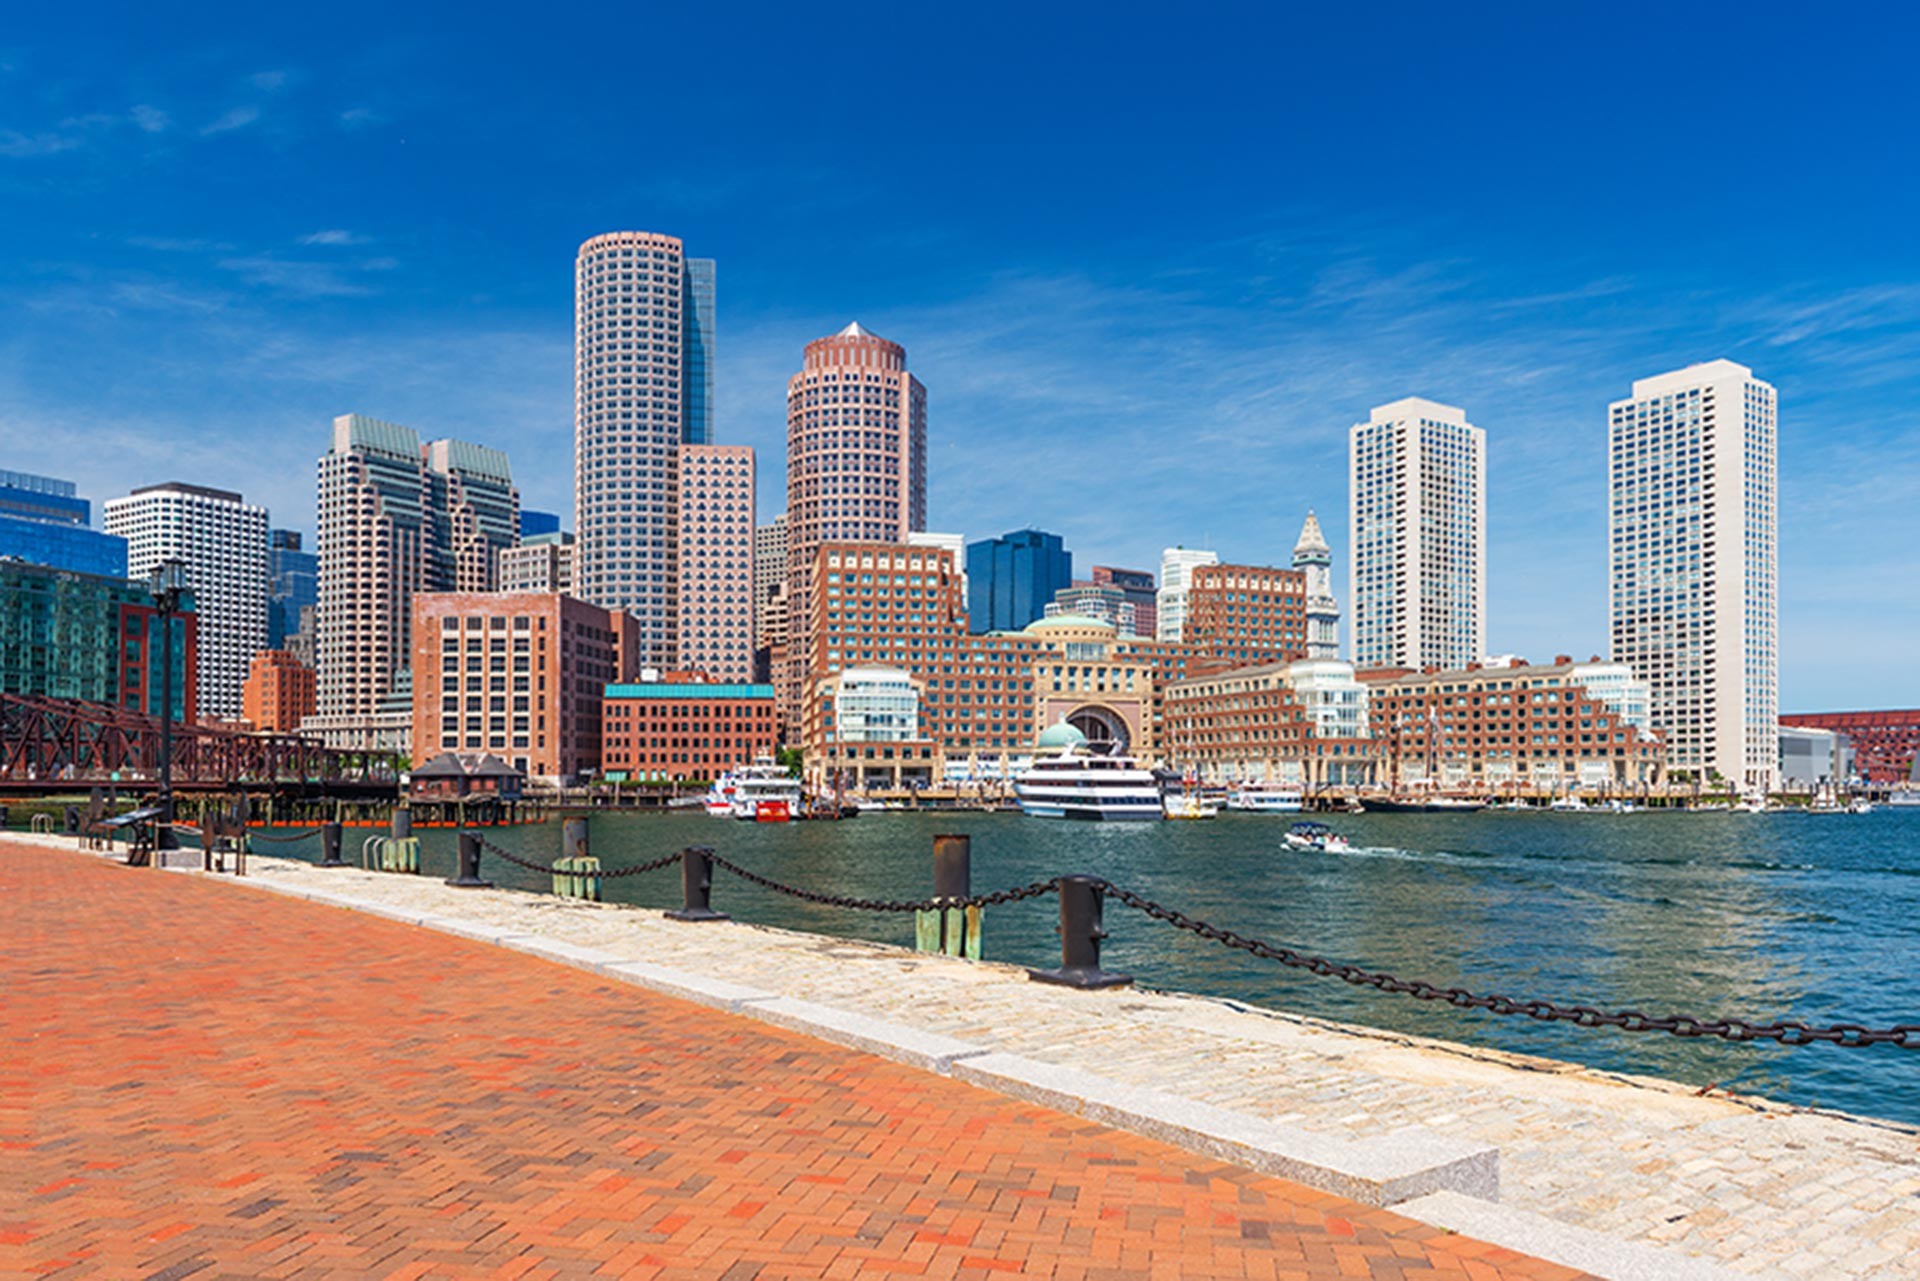 All-Star Connections is a recruitment agency in Boston that provides high-quality candidates for companies in engineering & technical industries.